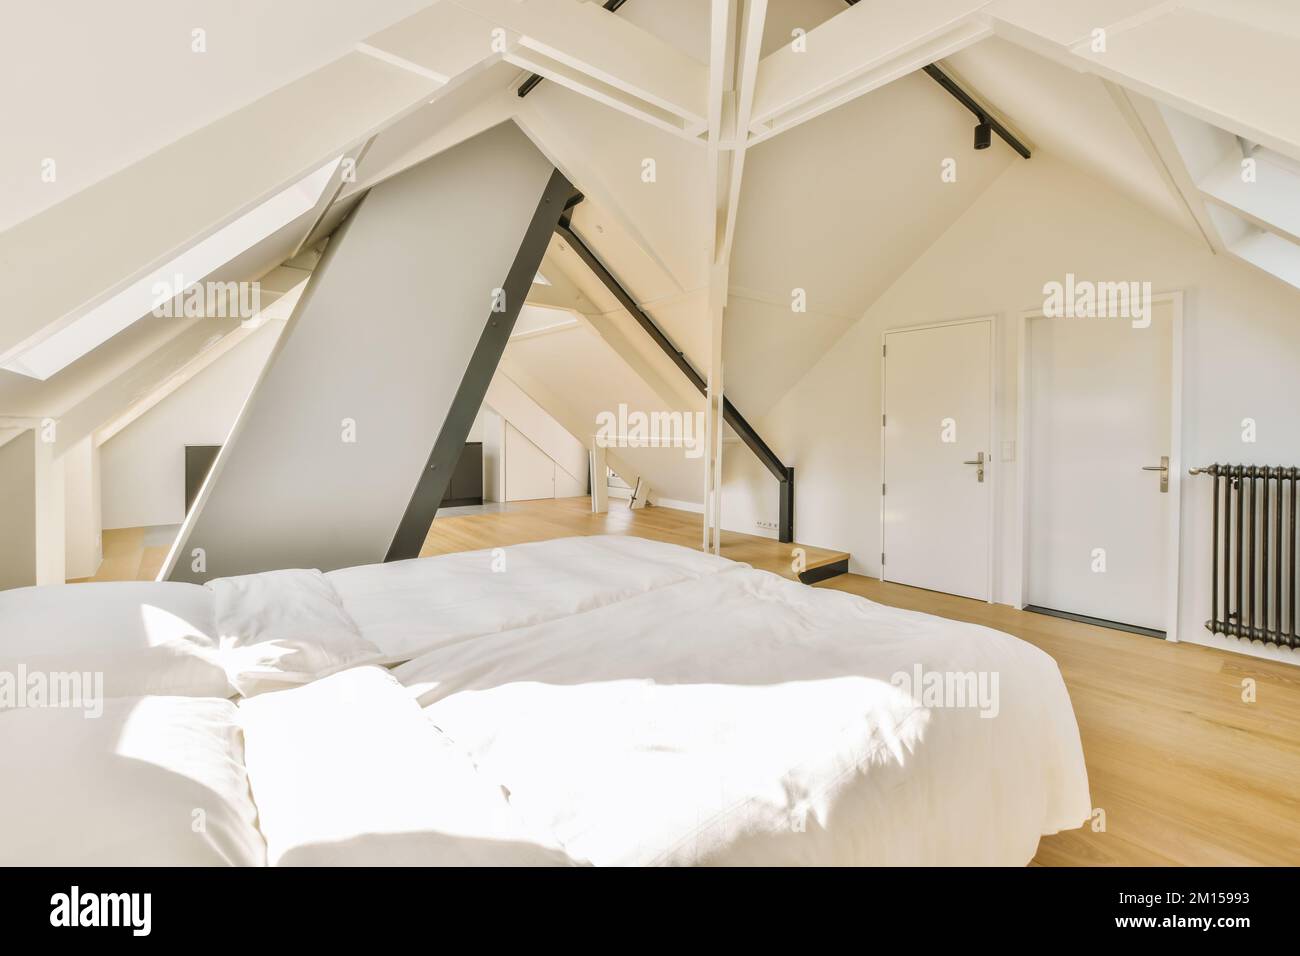 a bed in a bedroom with white sheets and pillows on top of the bed is an attic - style loft Stock Photo